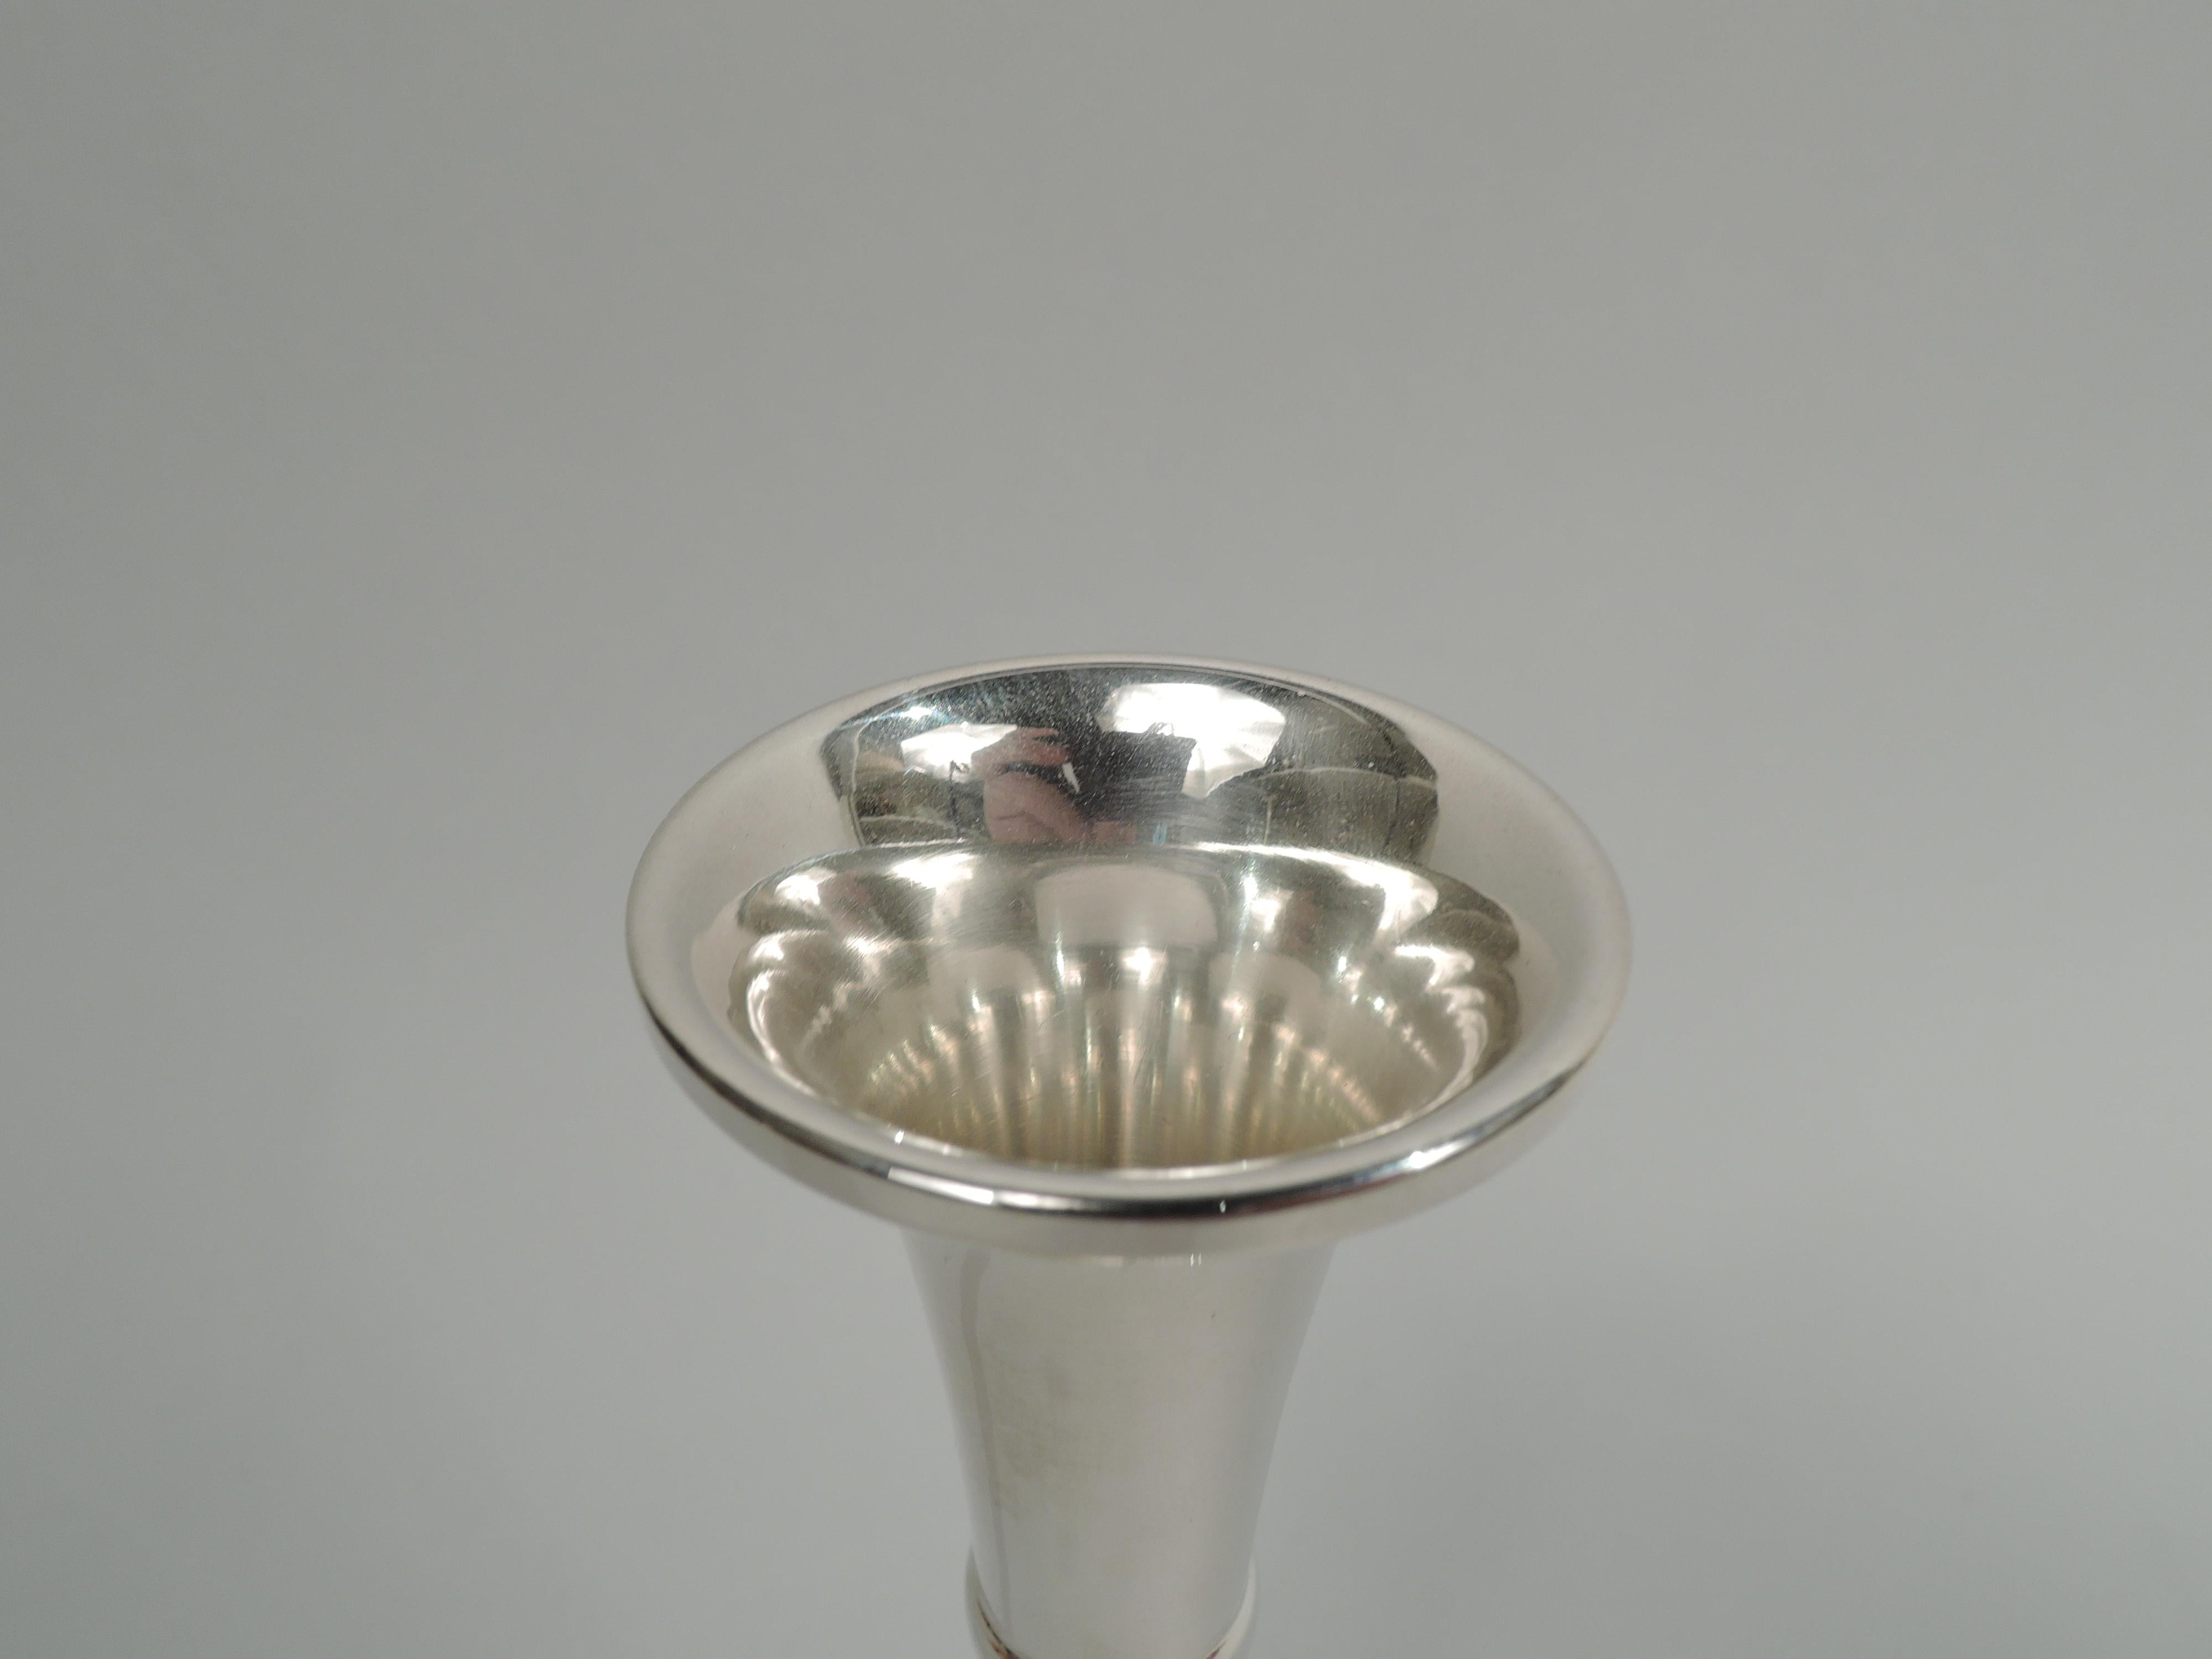 Mid-Century Modern sterling silver bud vase. Retailed by Cartier in New York. Girdled cone on raised and round foot with open and stylized leaf and flower sides. Marked “Cartier Sterling 390”. Weight: 2.8 troy ounces.